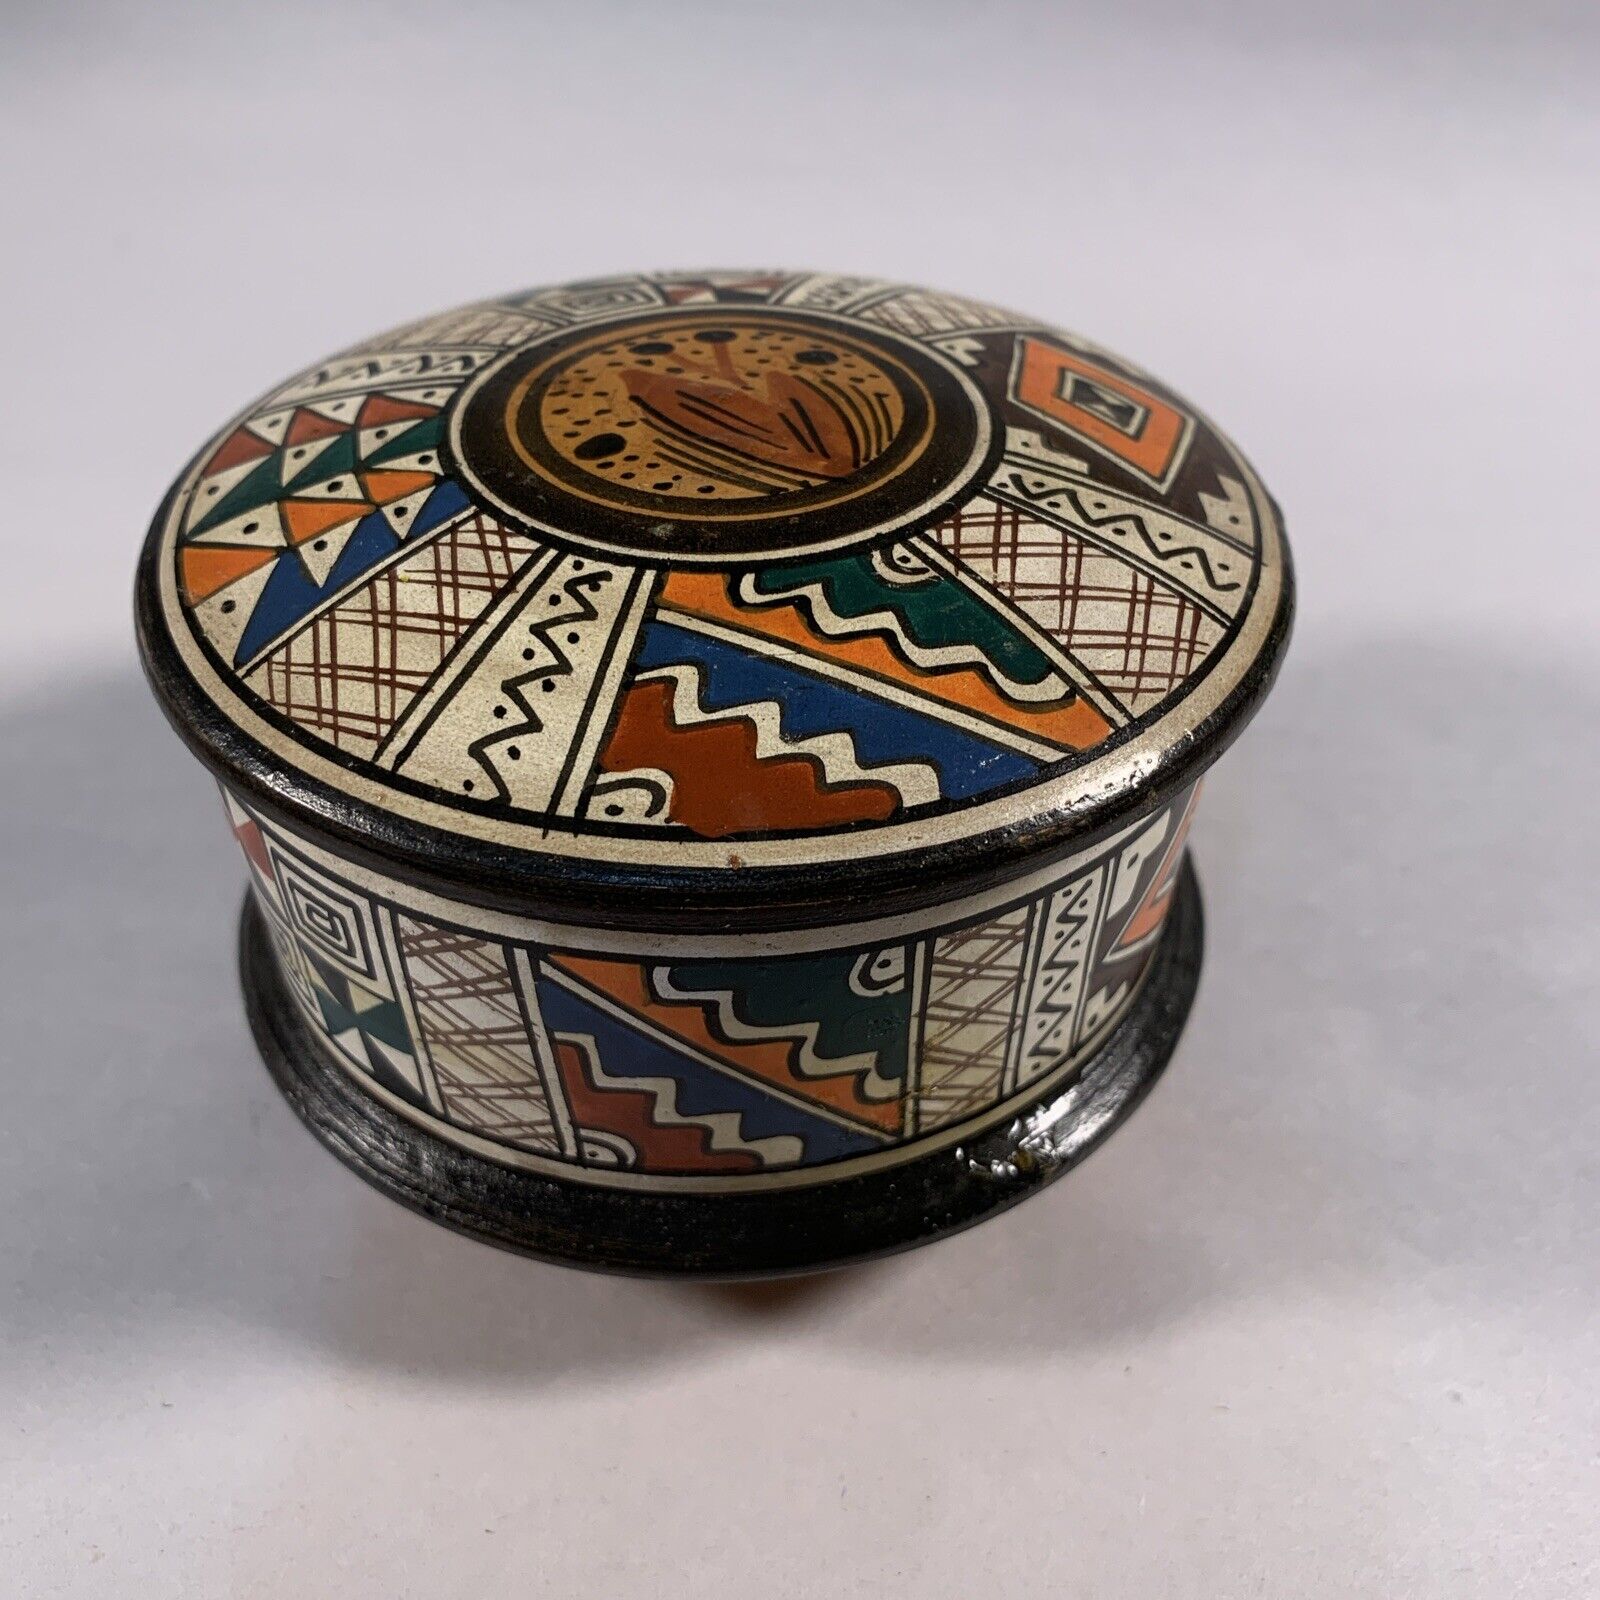 Beautiful Vintage Hand painted Trinket Box With Lid. 2.5” High X 4” Wide